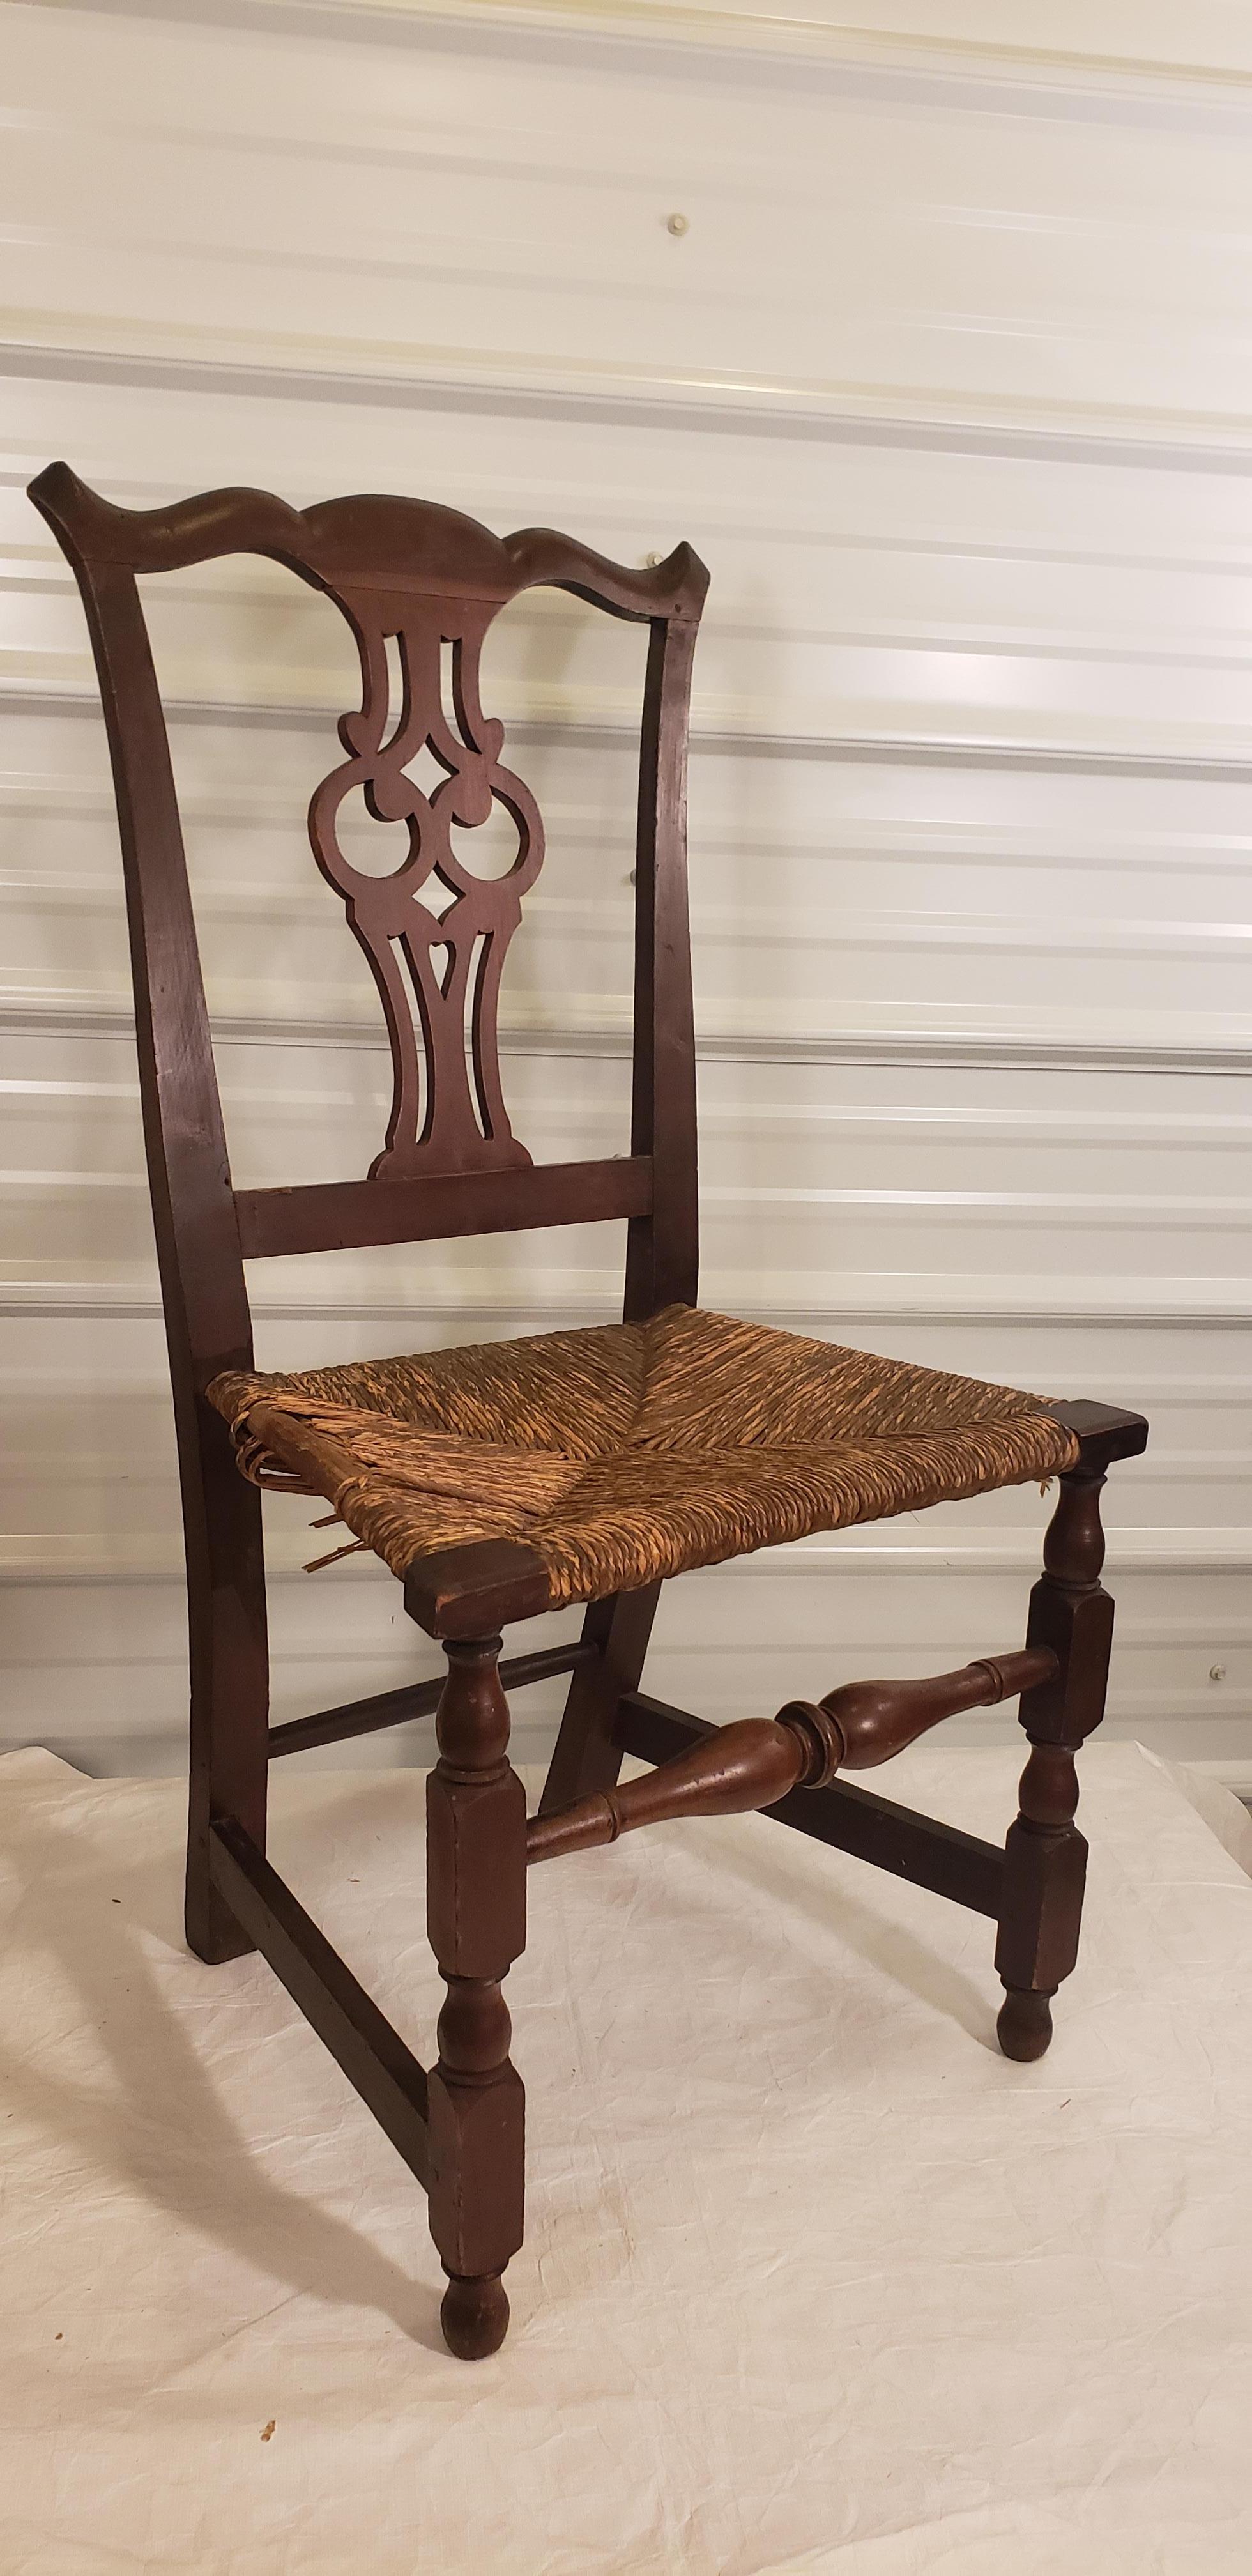 Matched Pair of Chippendale Side Chairs, Massachusetts, Mid 18th Century For Sale 2